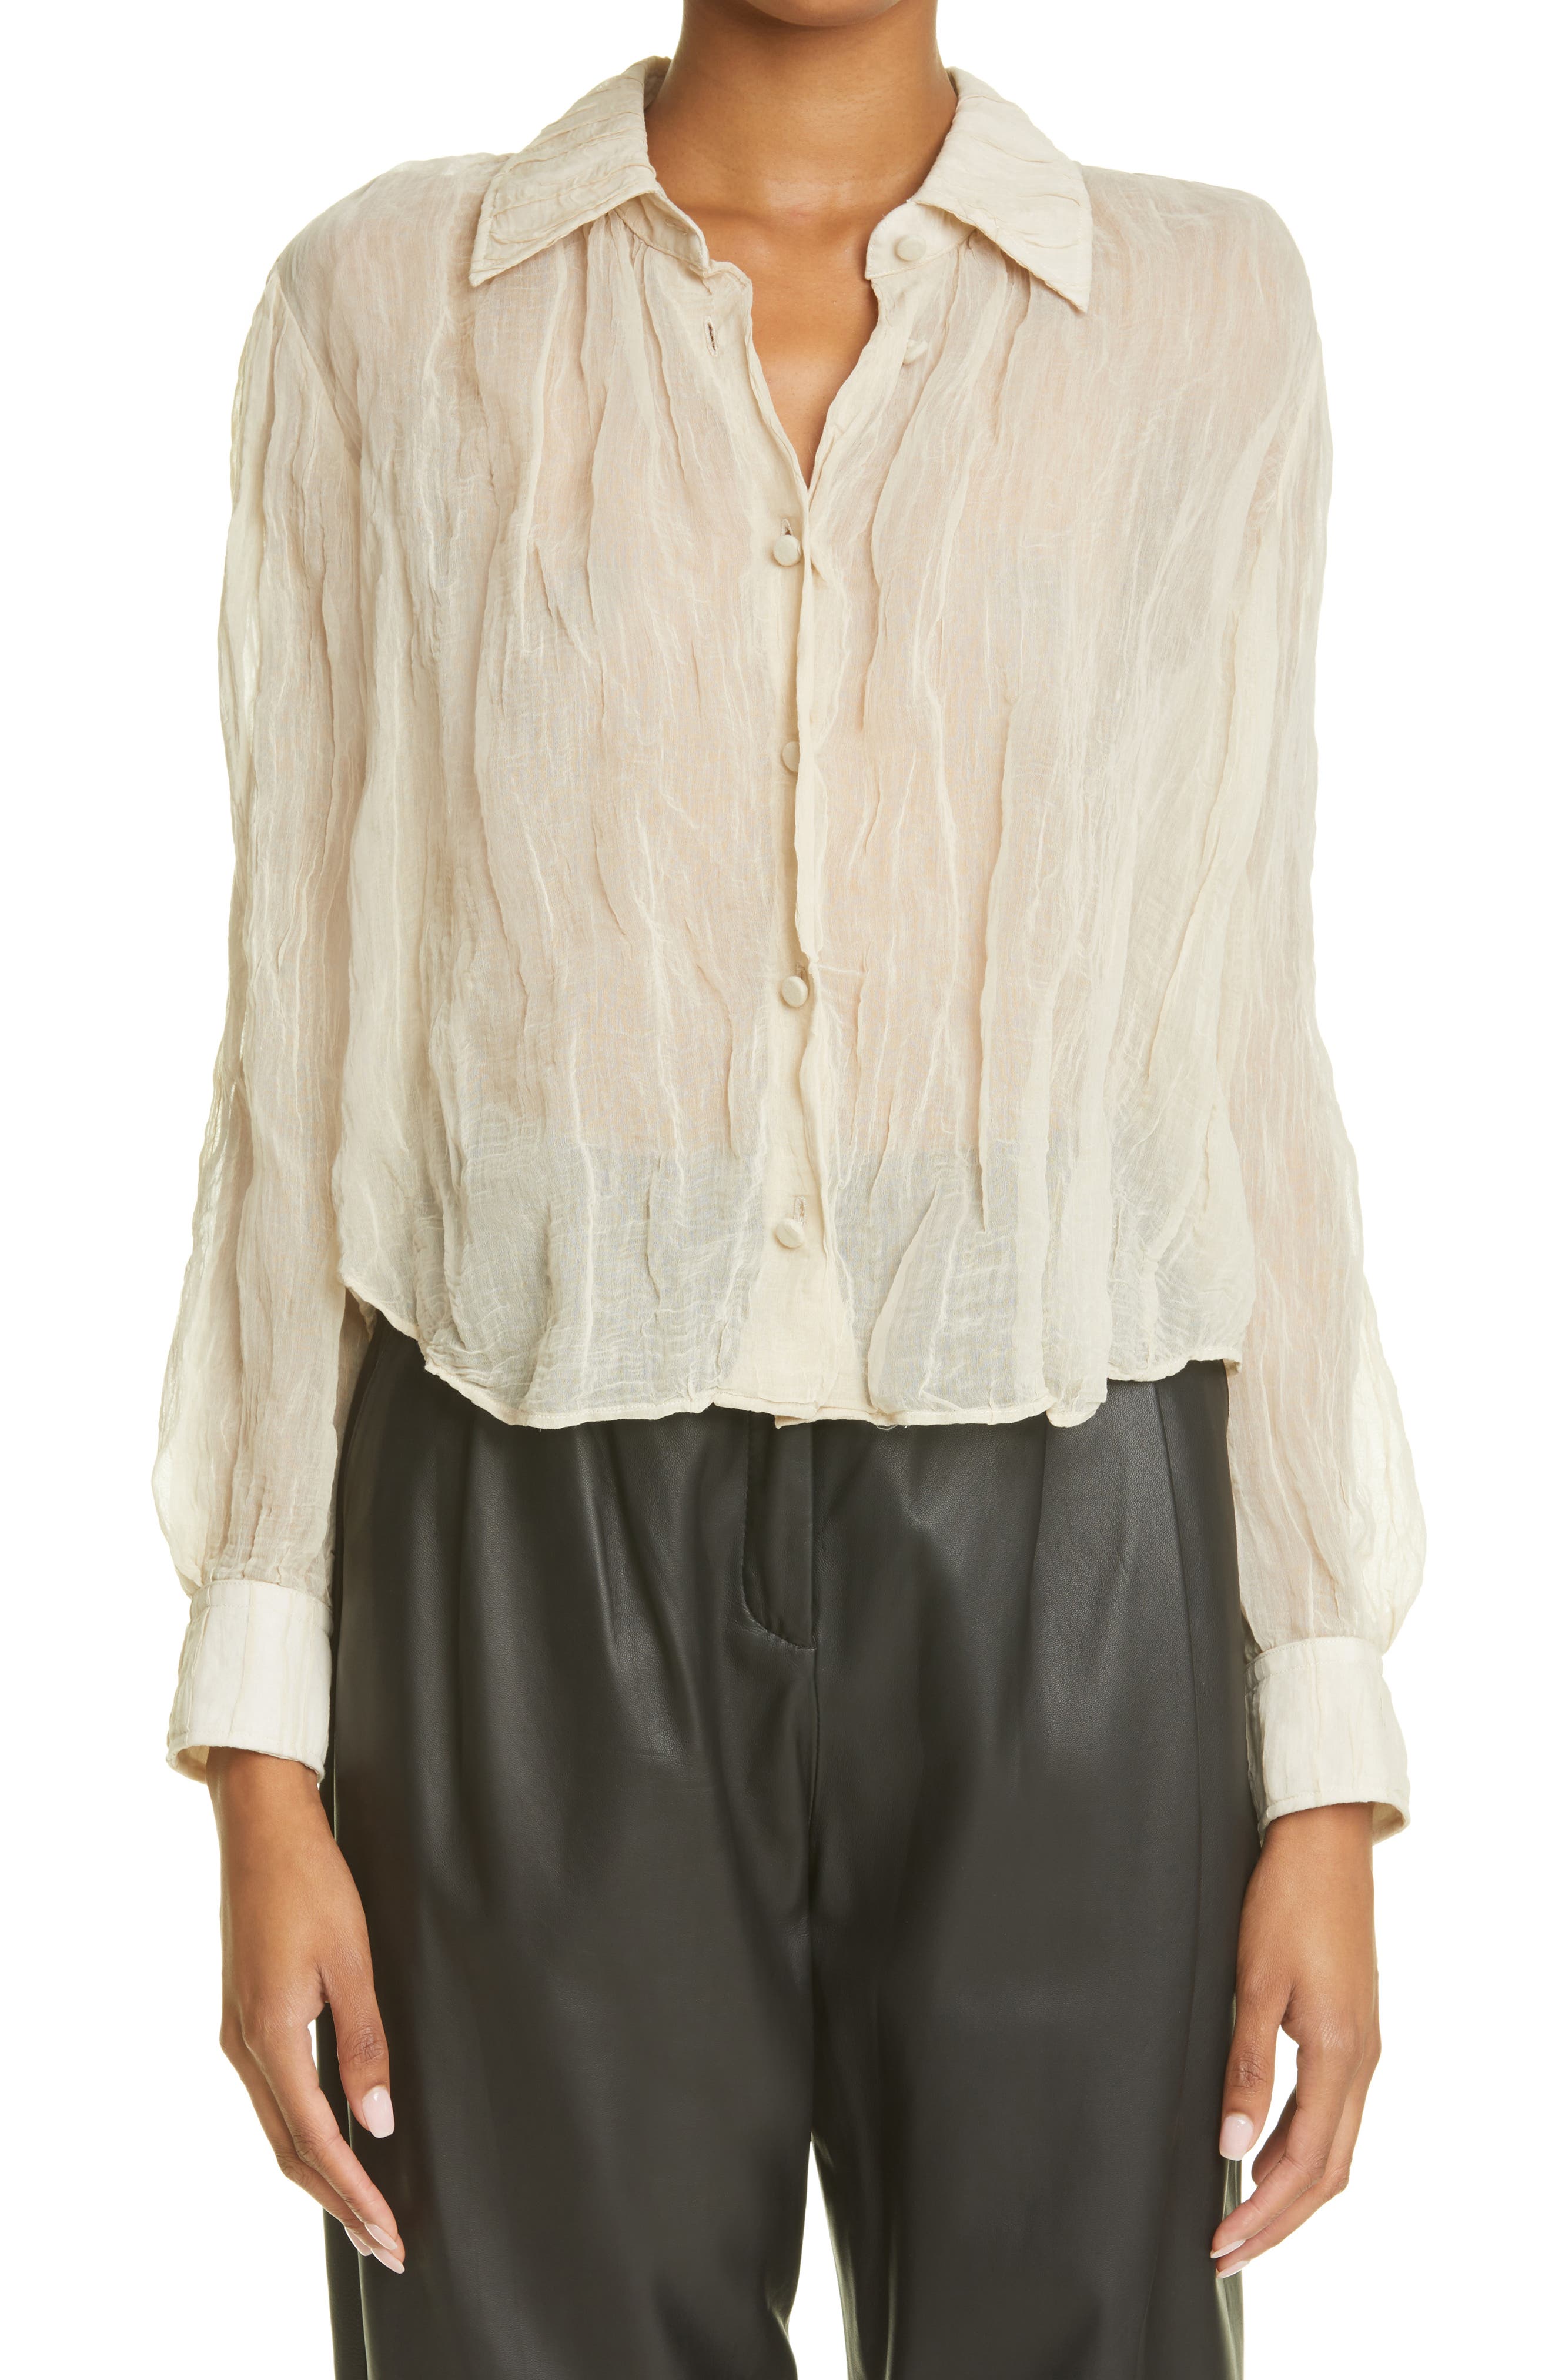 Khaite Francoise Cotton & Silk Blouse in Natural at Nordstrom, Size X-Small